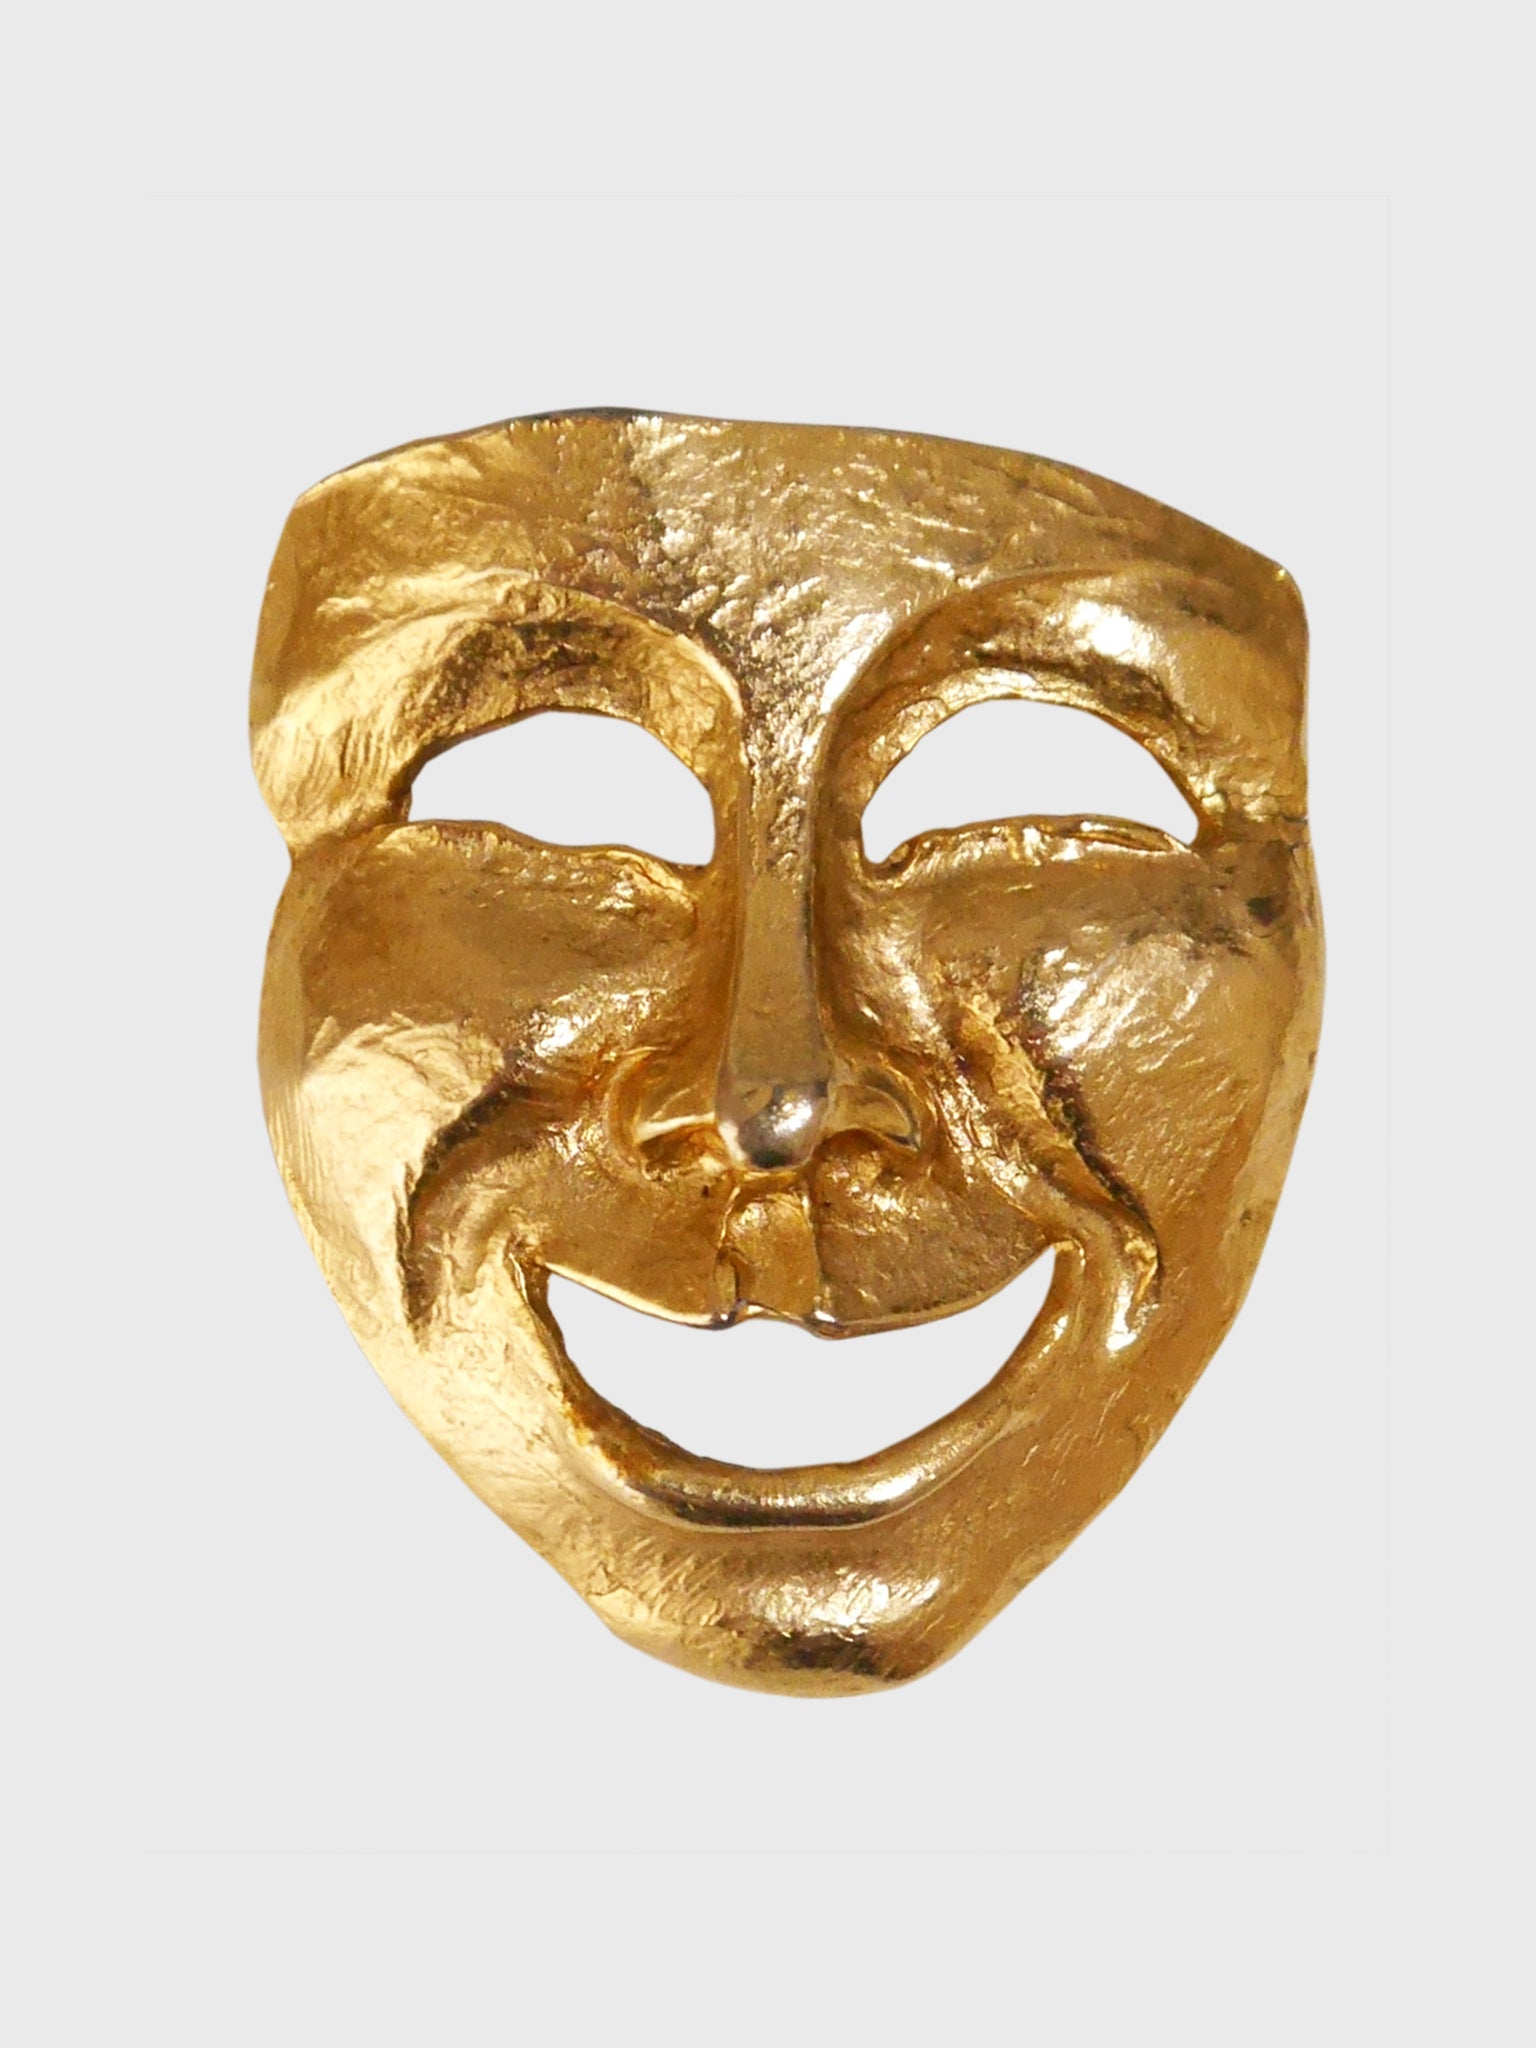 MOSCHINO 1980s 1990s Vintage Gold-Tone Theater Comedy Thalia Mask Brooch